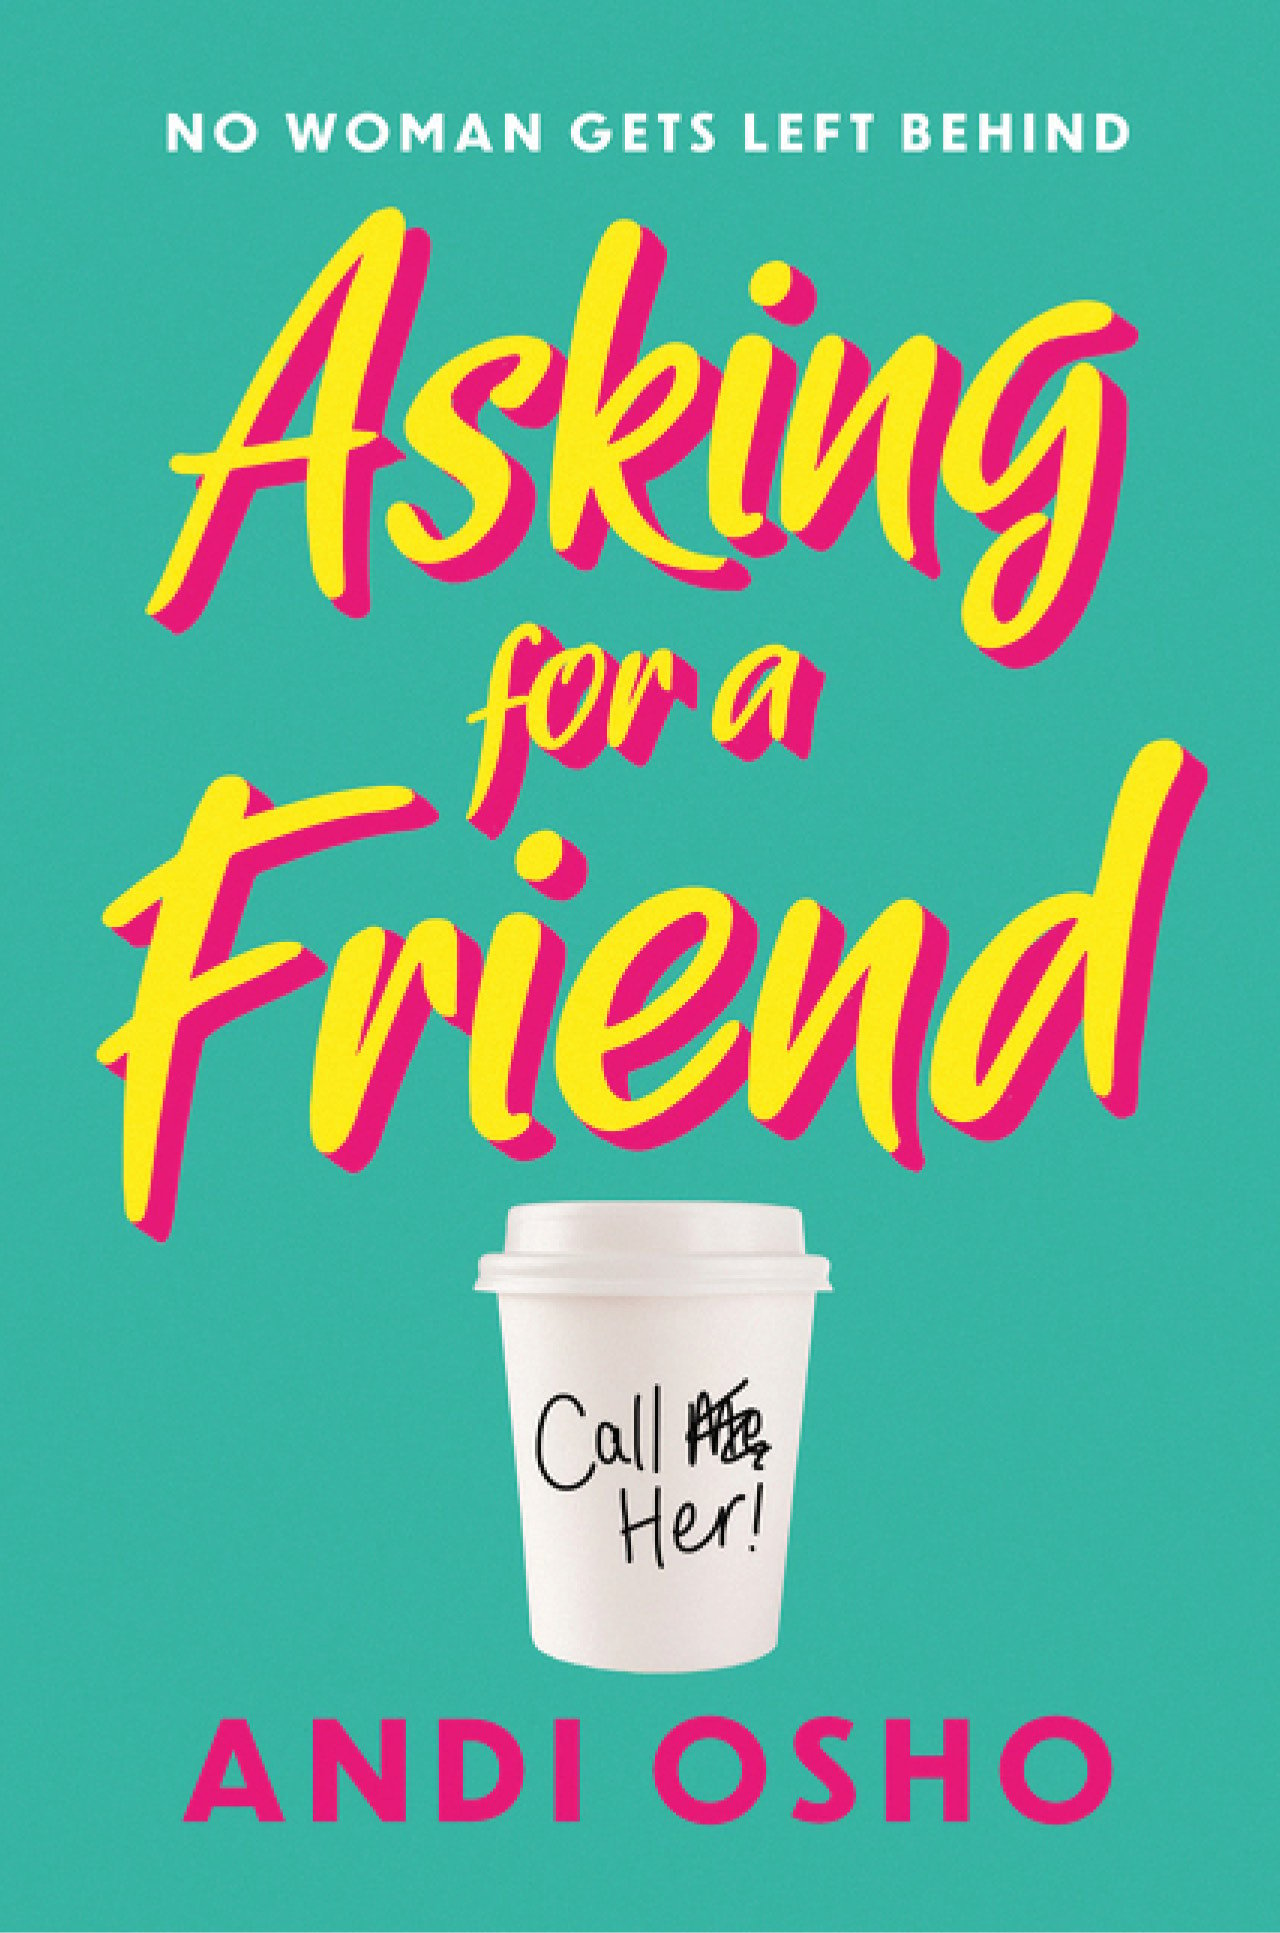 The cover of "Asking for a Friend" by Andi Osho